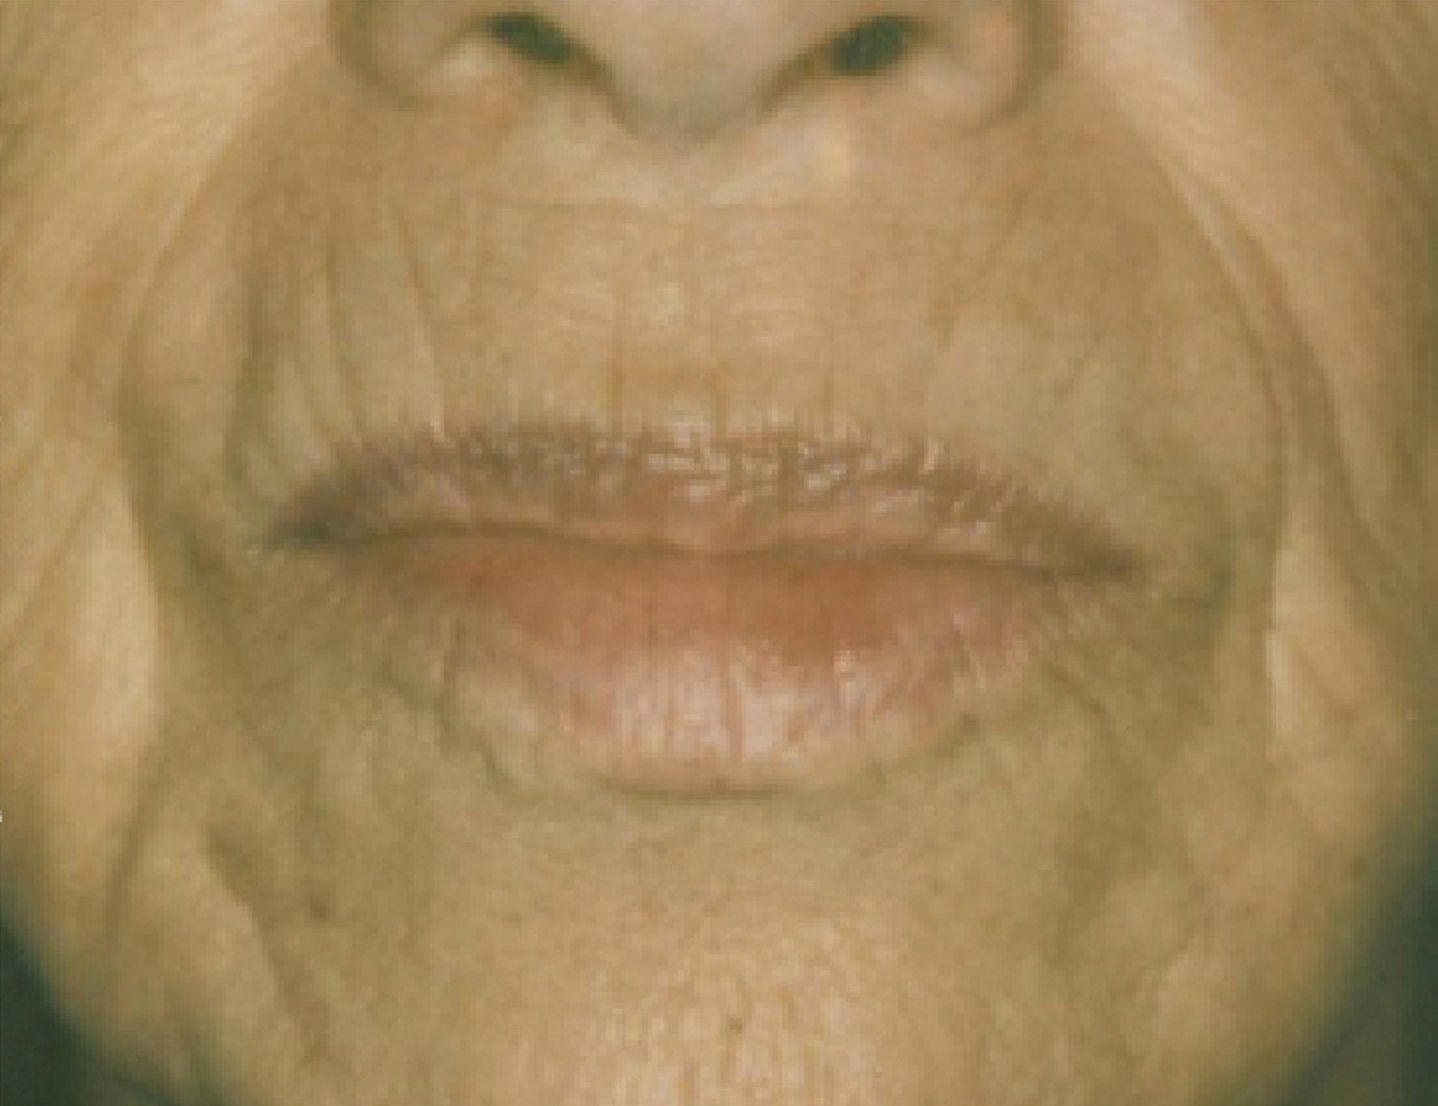 BBL Before Photo - A close up of a woman 's lips.